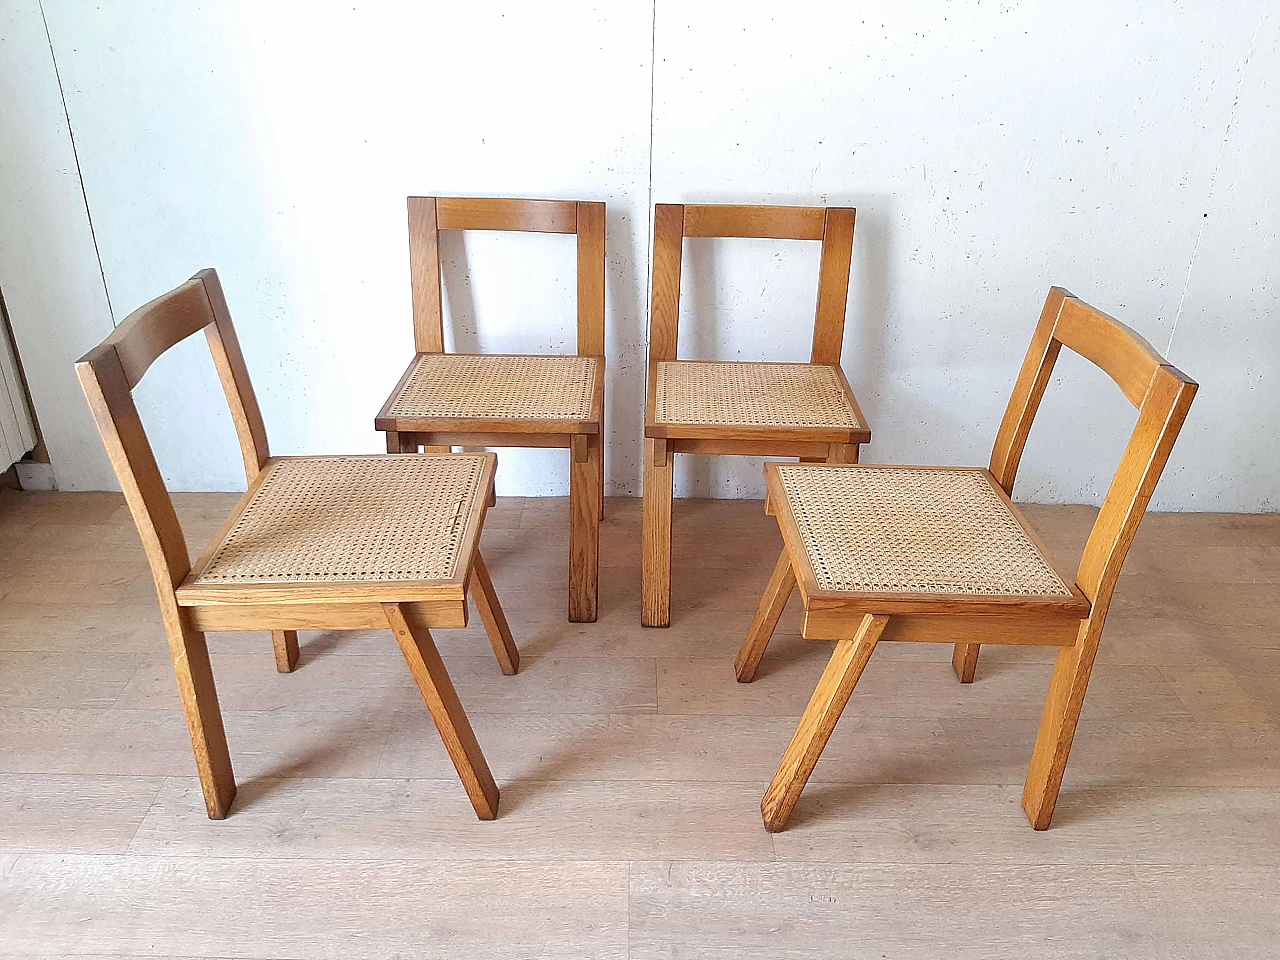 4 Oak chairs with Vienna straw seats, 1980s 1